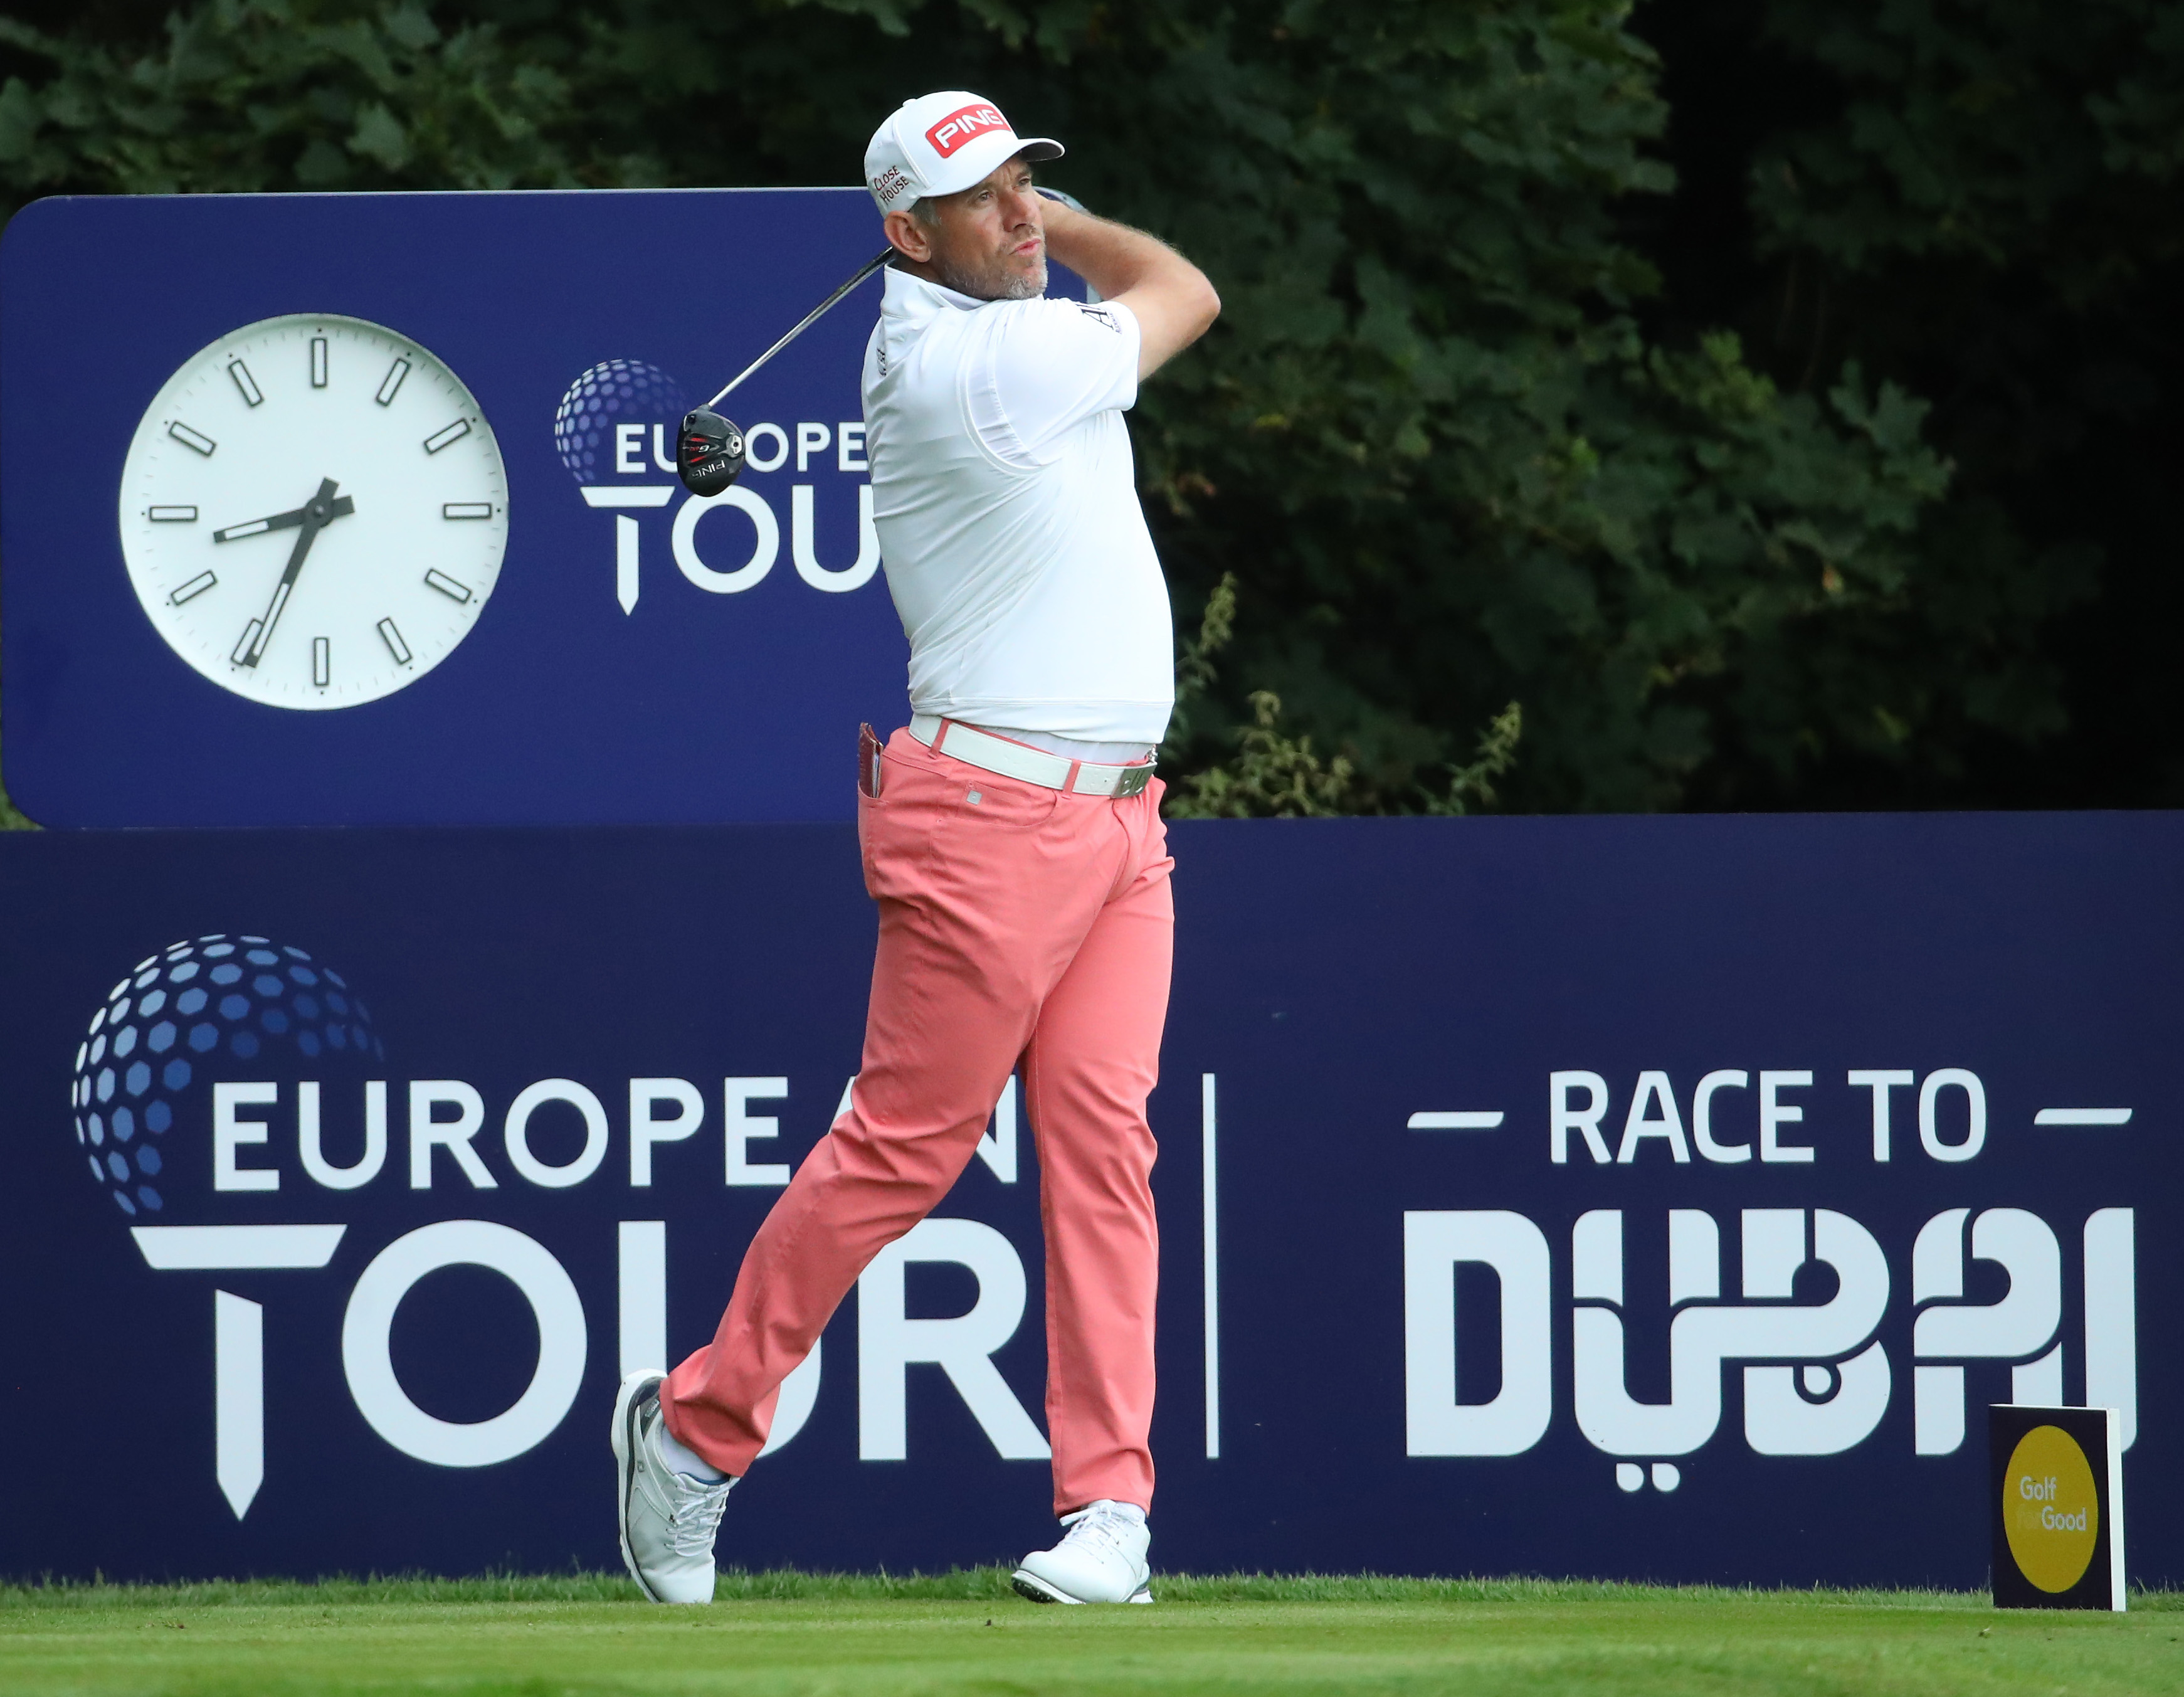 As the European Tour holds on heading into 2021, there are brighter signs ahead Golf News and Tour Information GolfDigest